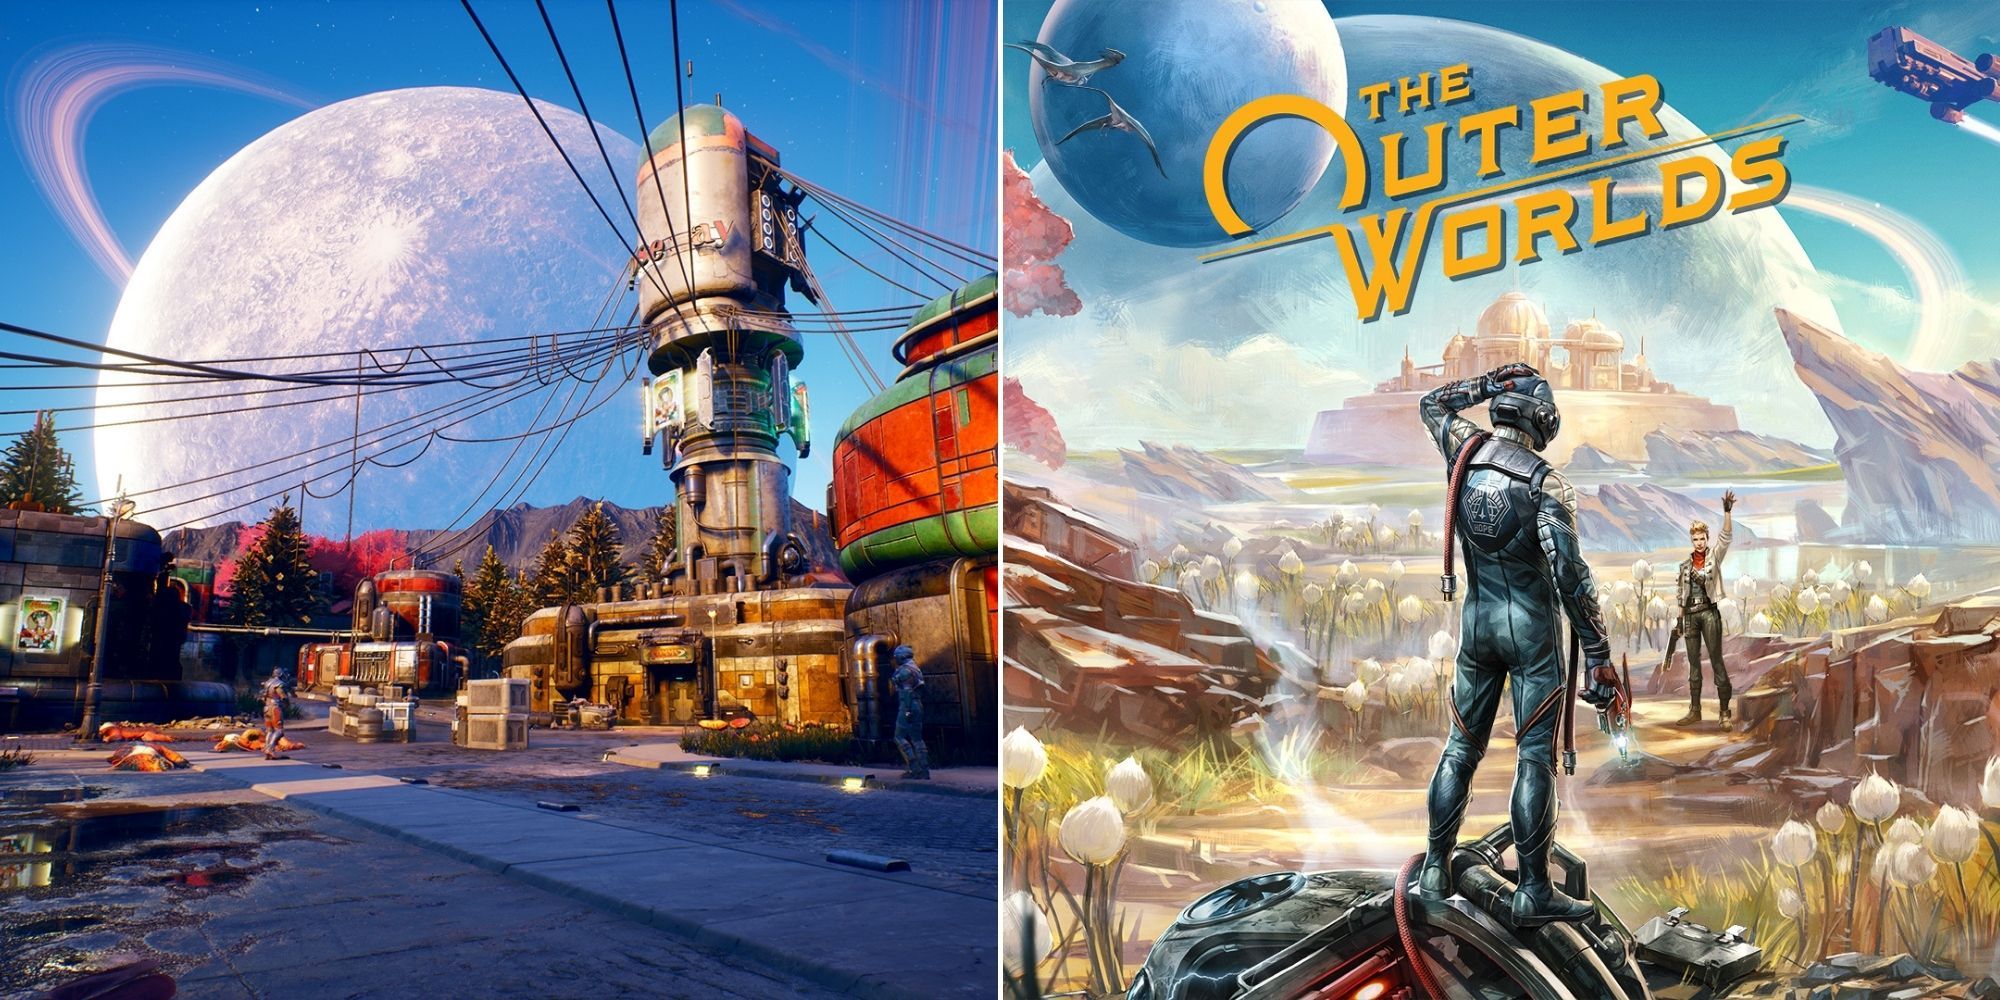 The Outer Worlds - Roseway after an attack - The Outer Worlds cover art